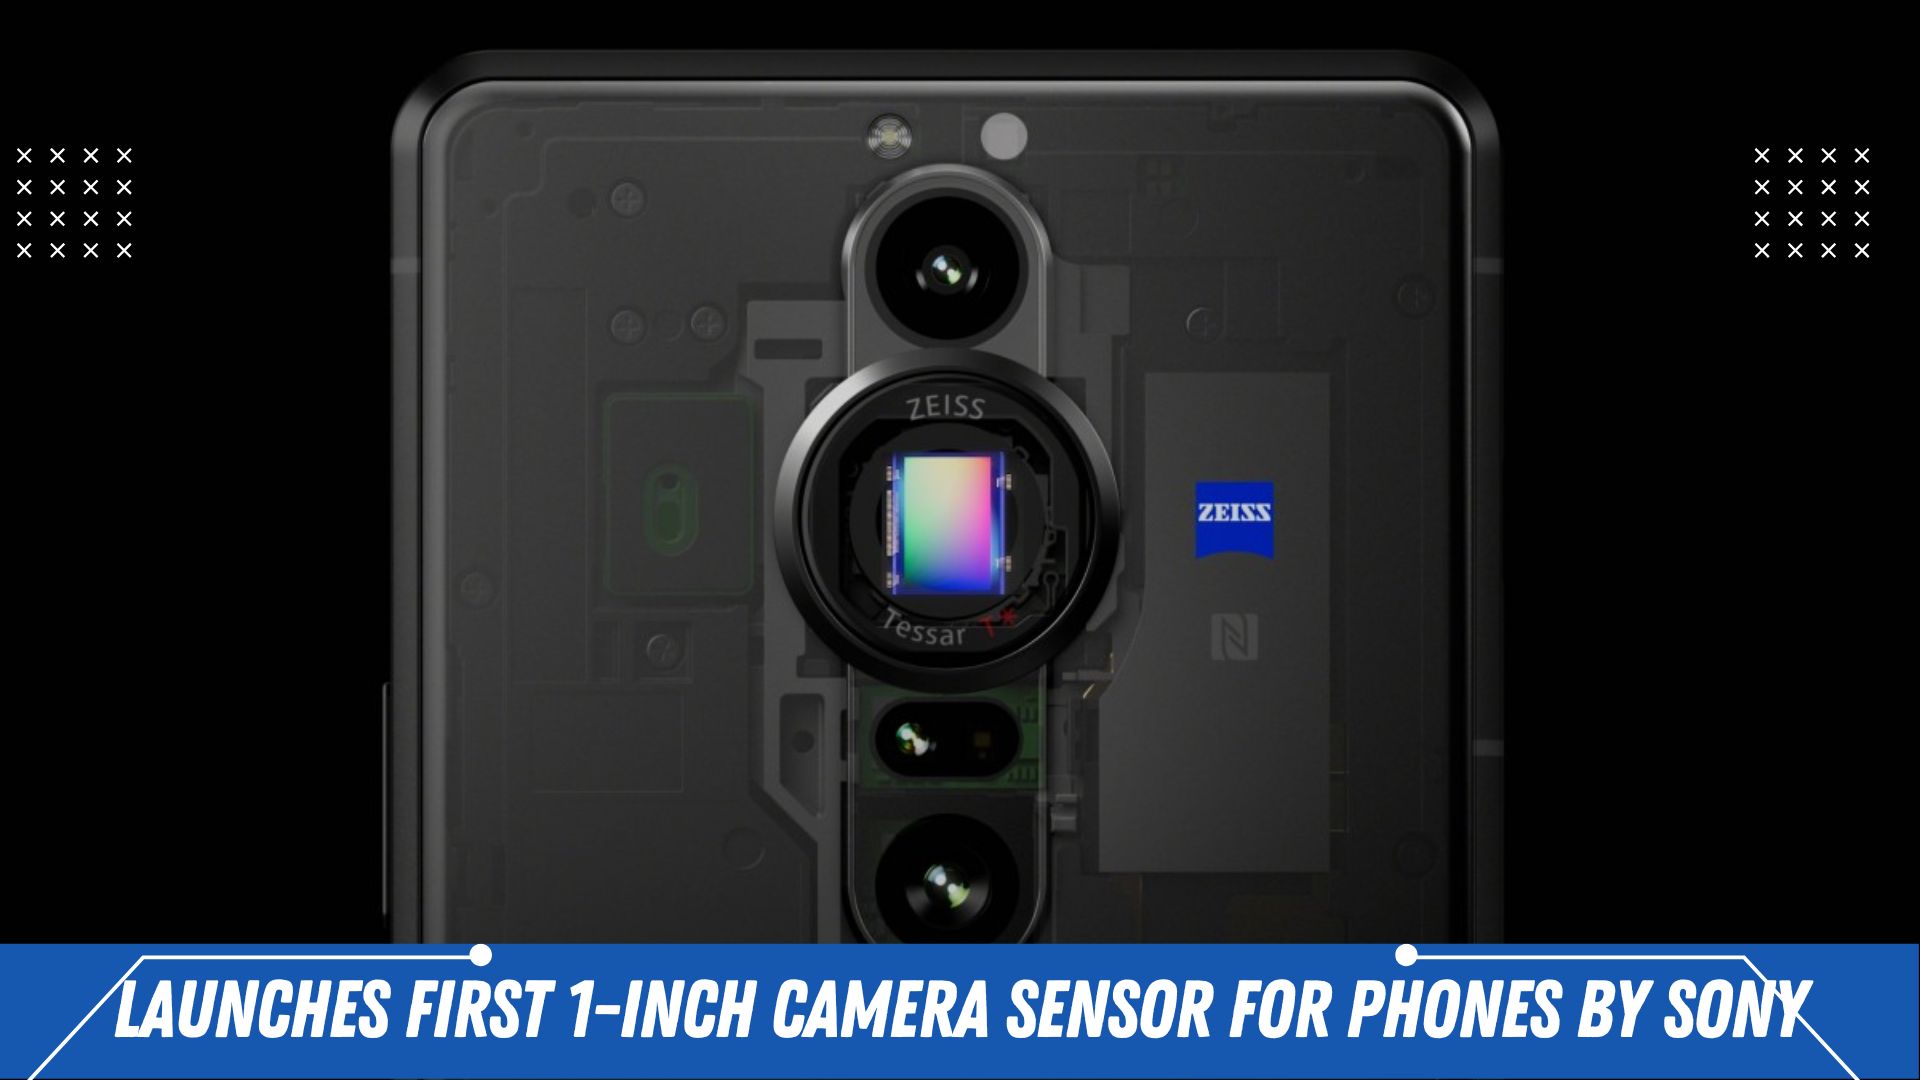 Launches First 1-inch Camera Sensor For Phones By Sony